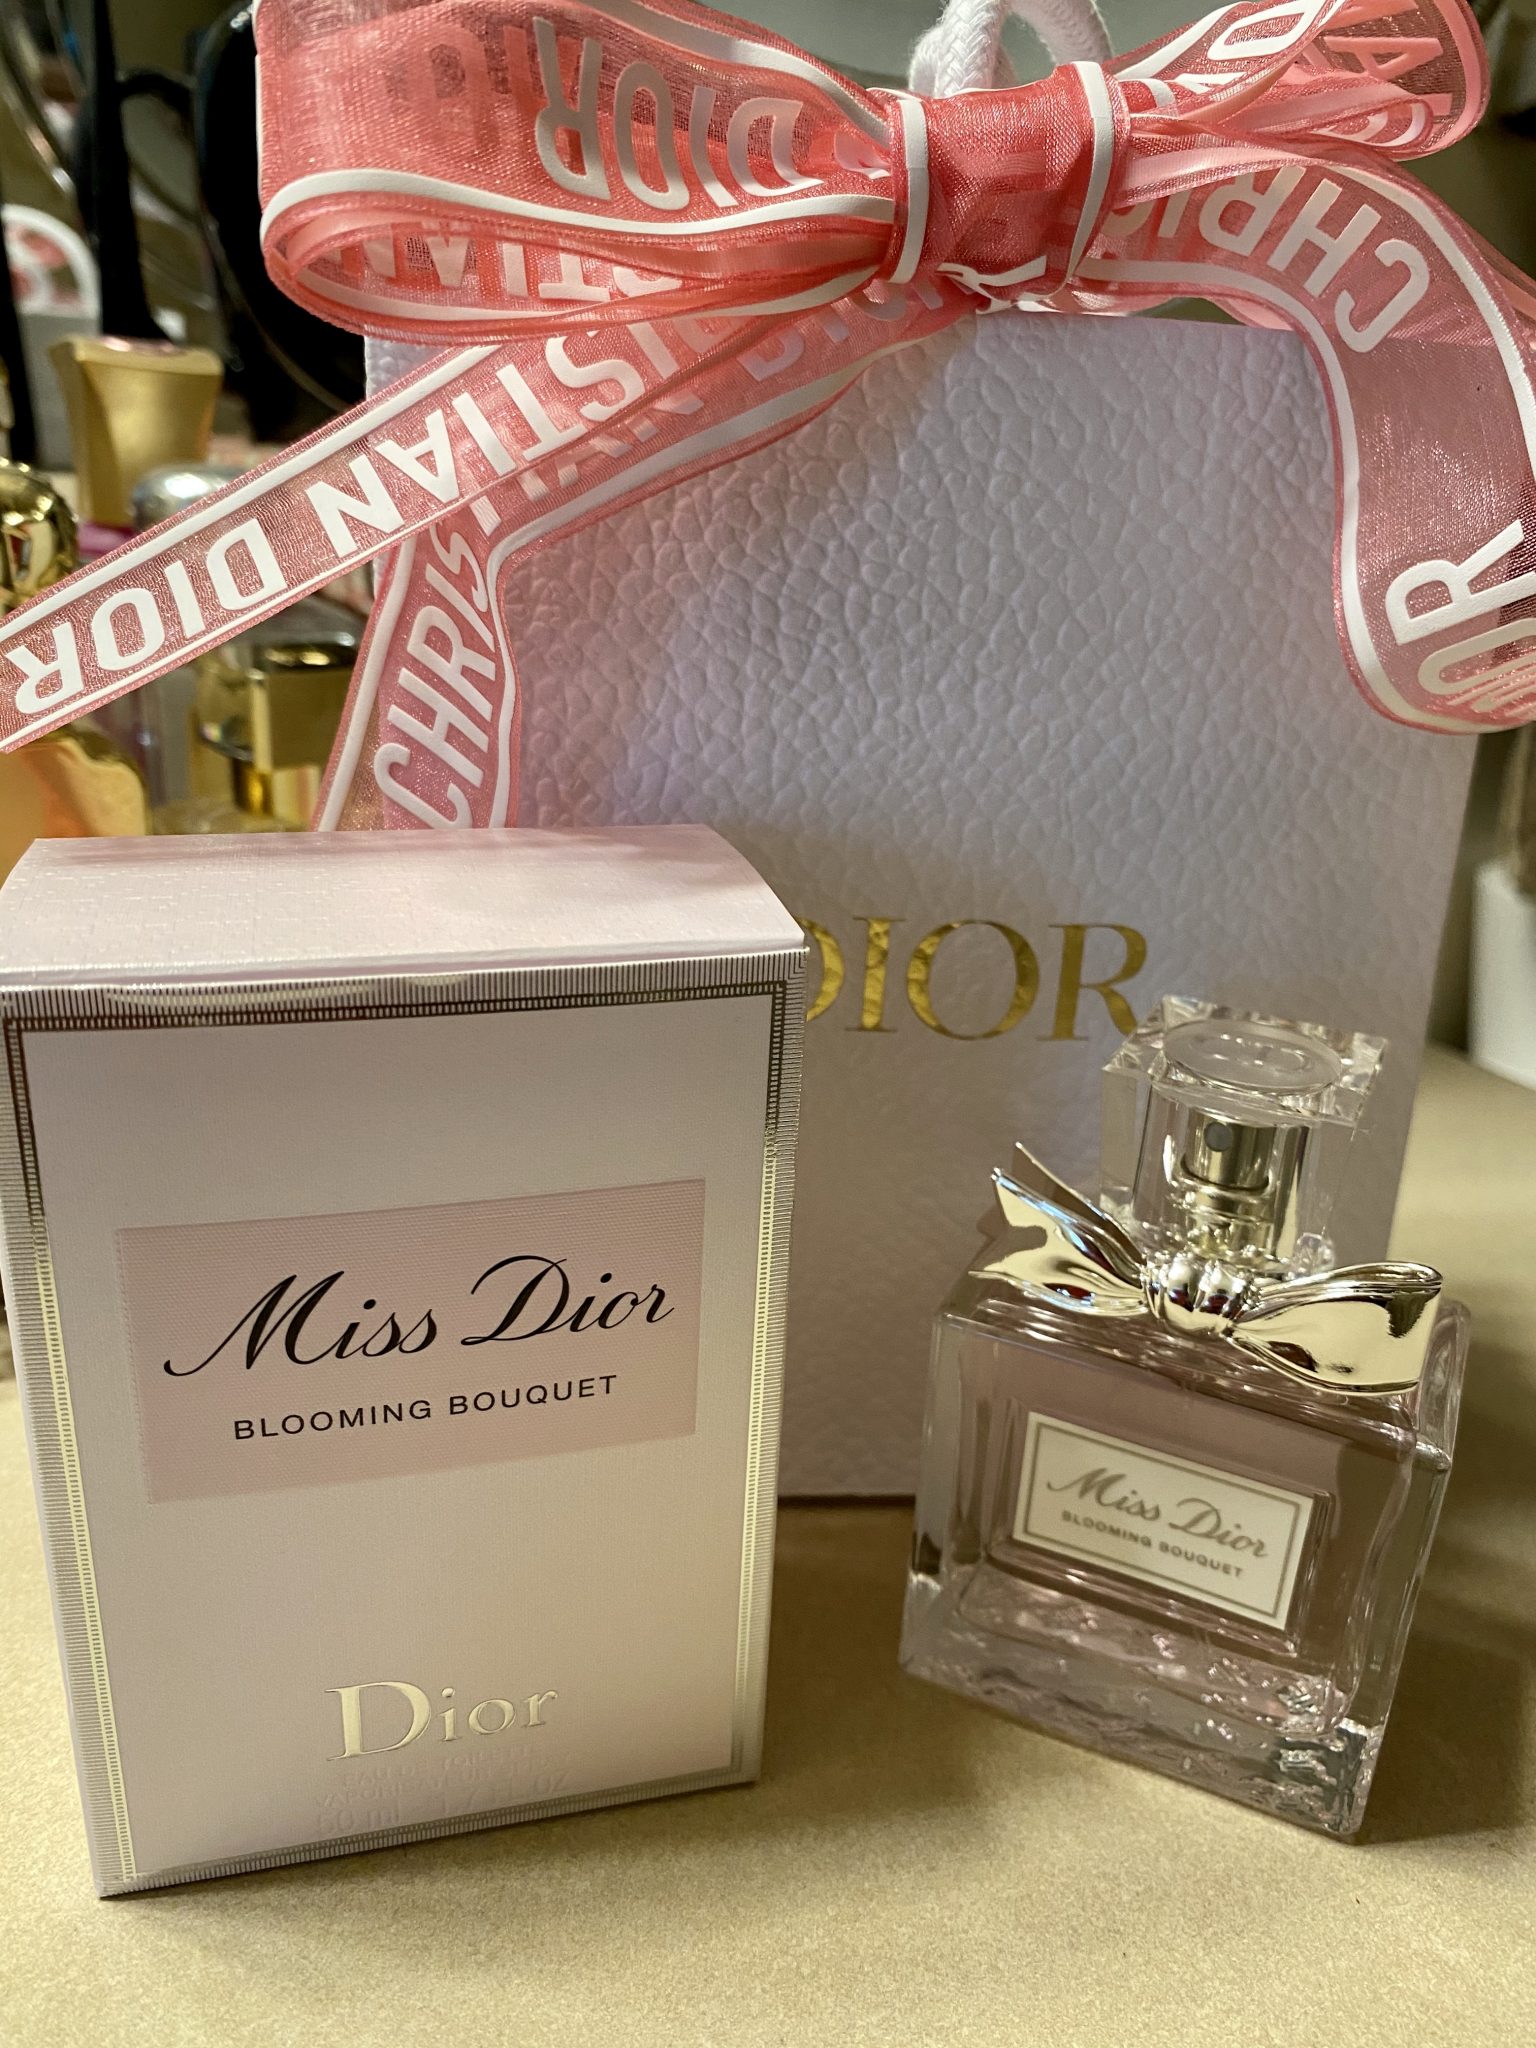 New Fragrance: Miss Dior Blooming Bouquet - Talking With Tami